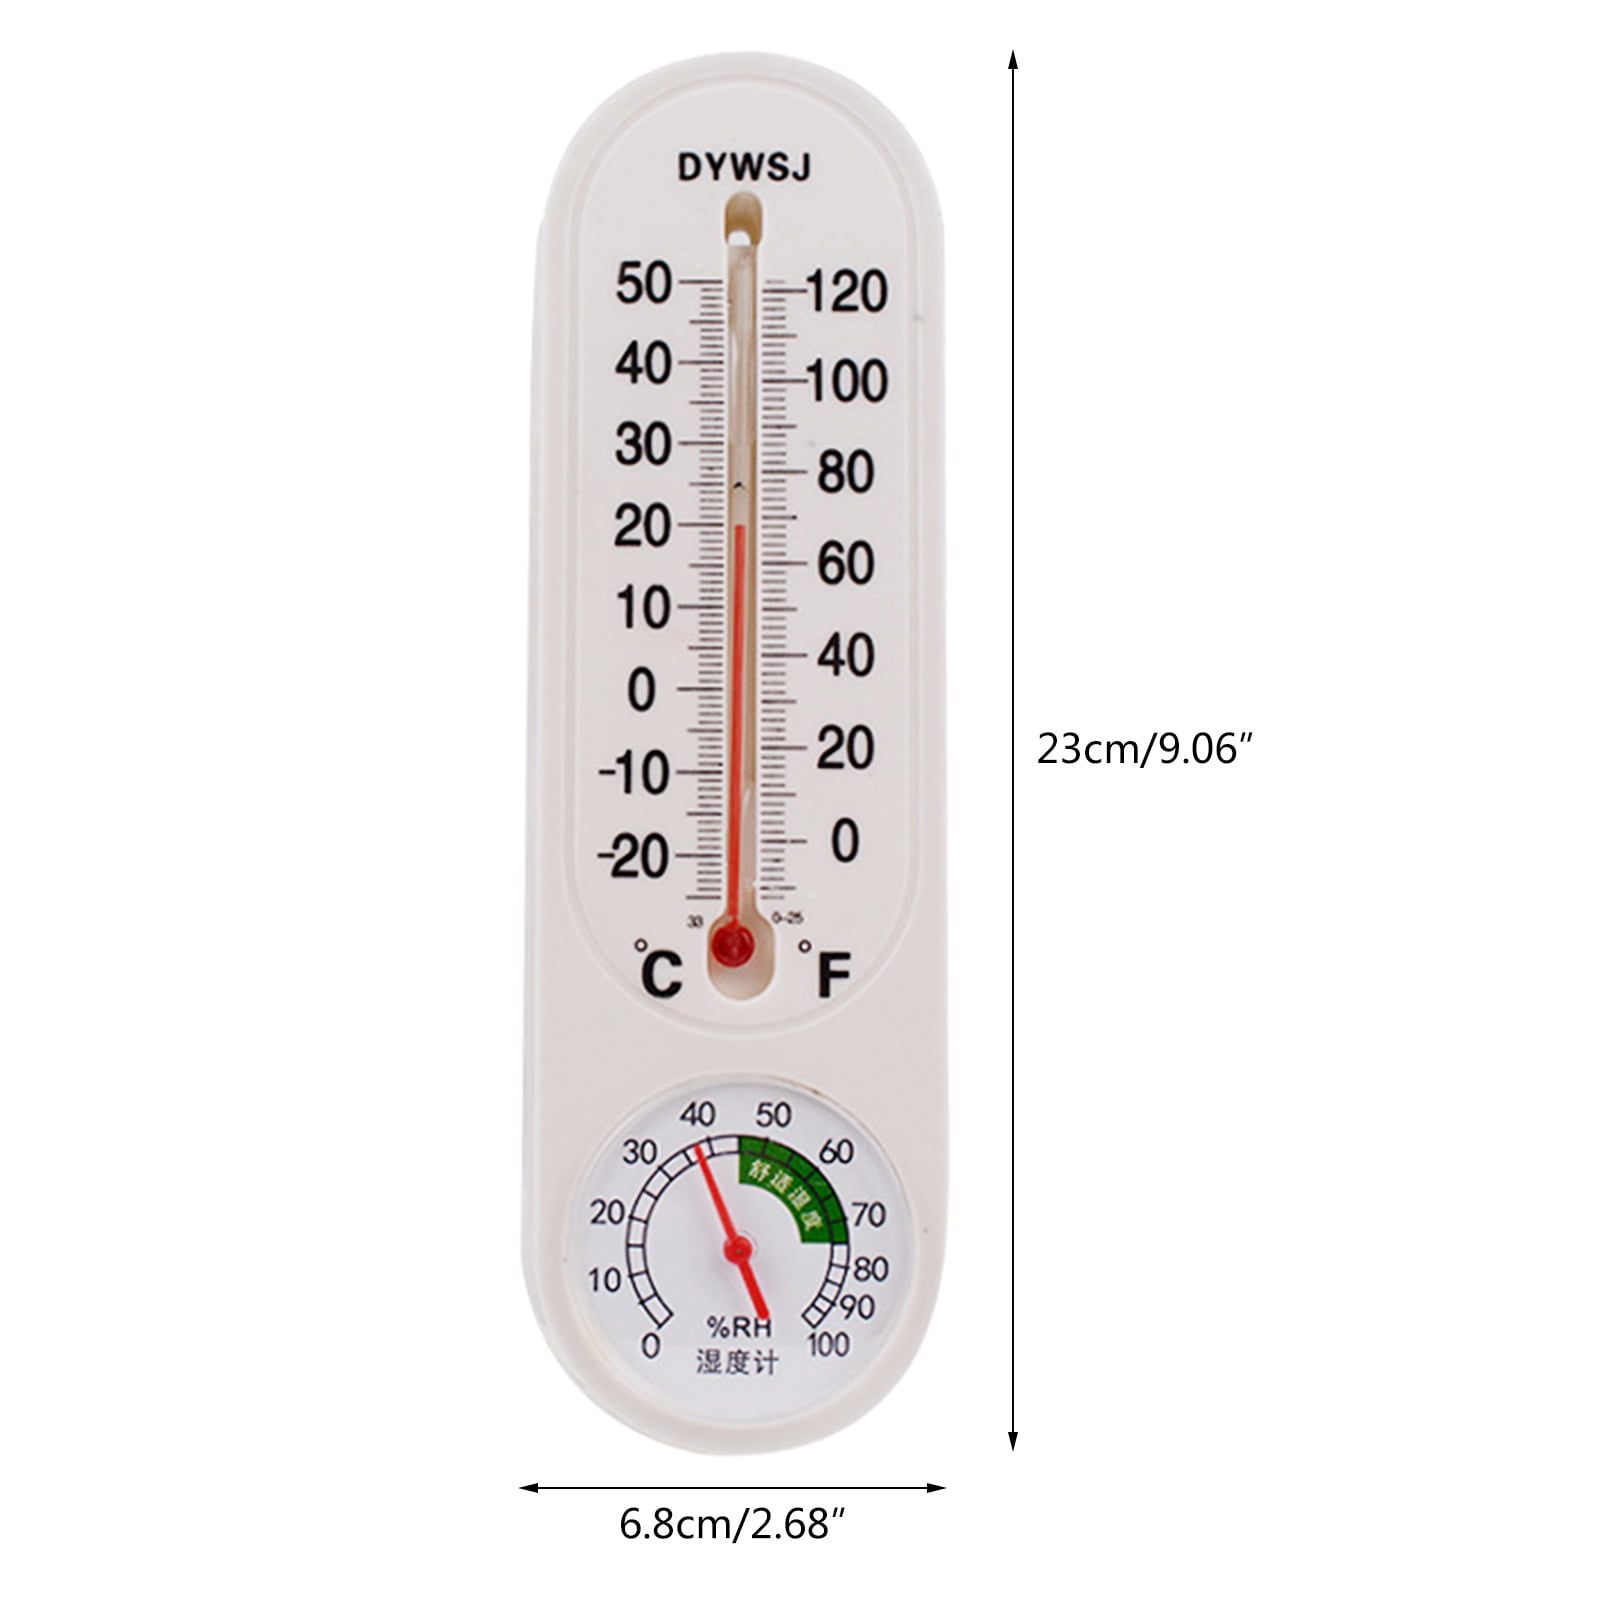 Hygrometer/Thermometer Combos: AcuRite 06043 vs. ThermoPro TP-65